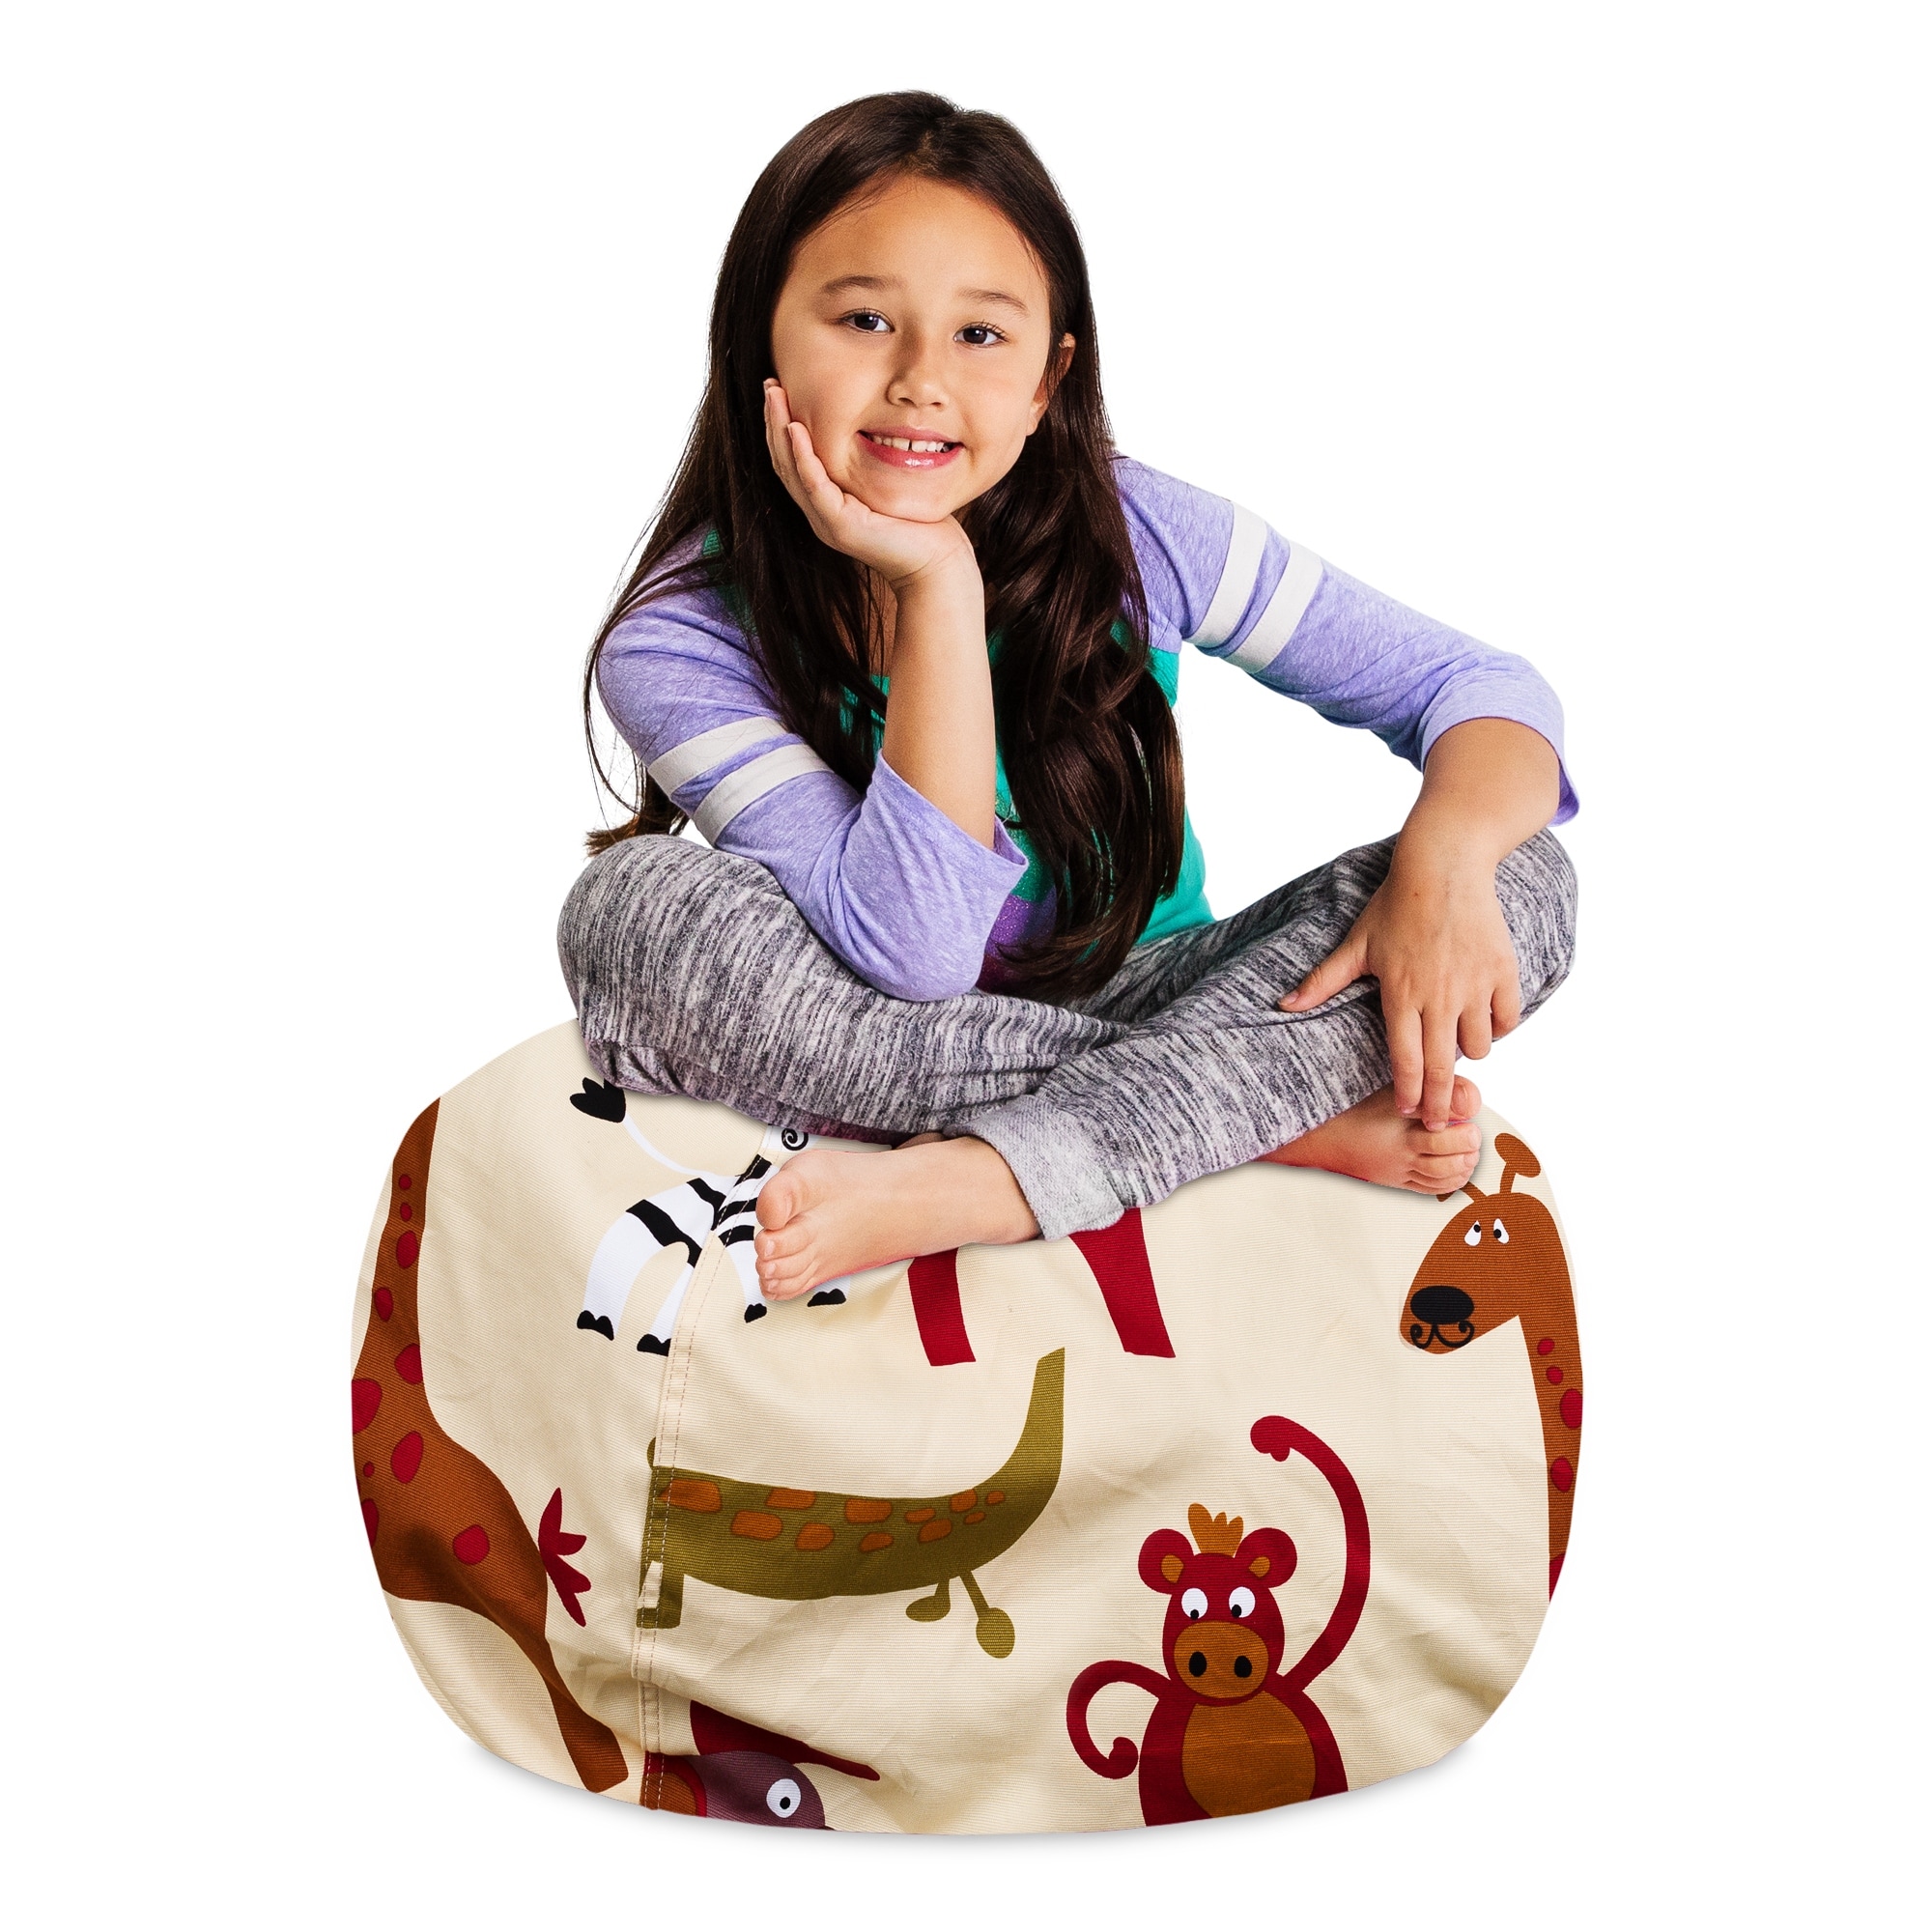 RTMX&kk Extra Large Bean Bag Chair Cover Stuffed Animal Storage Bean Bag  Chair Cover for Kids Room Stuff and Sit Storage Bean Bag 4.5/5/6FT (Cover